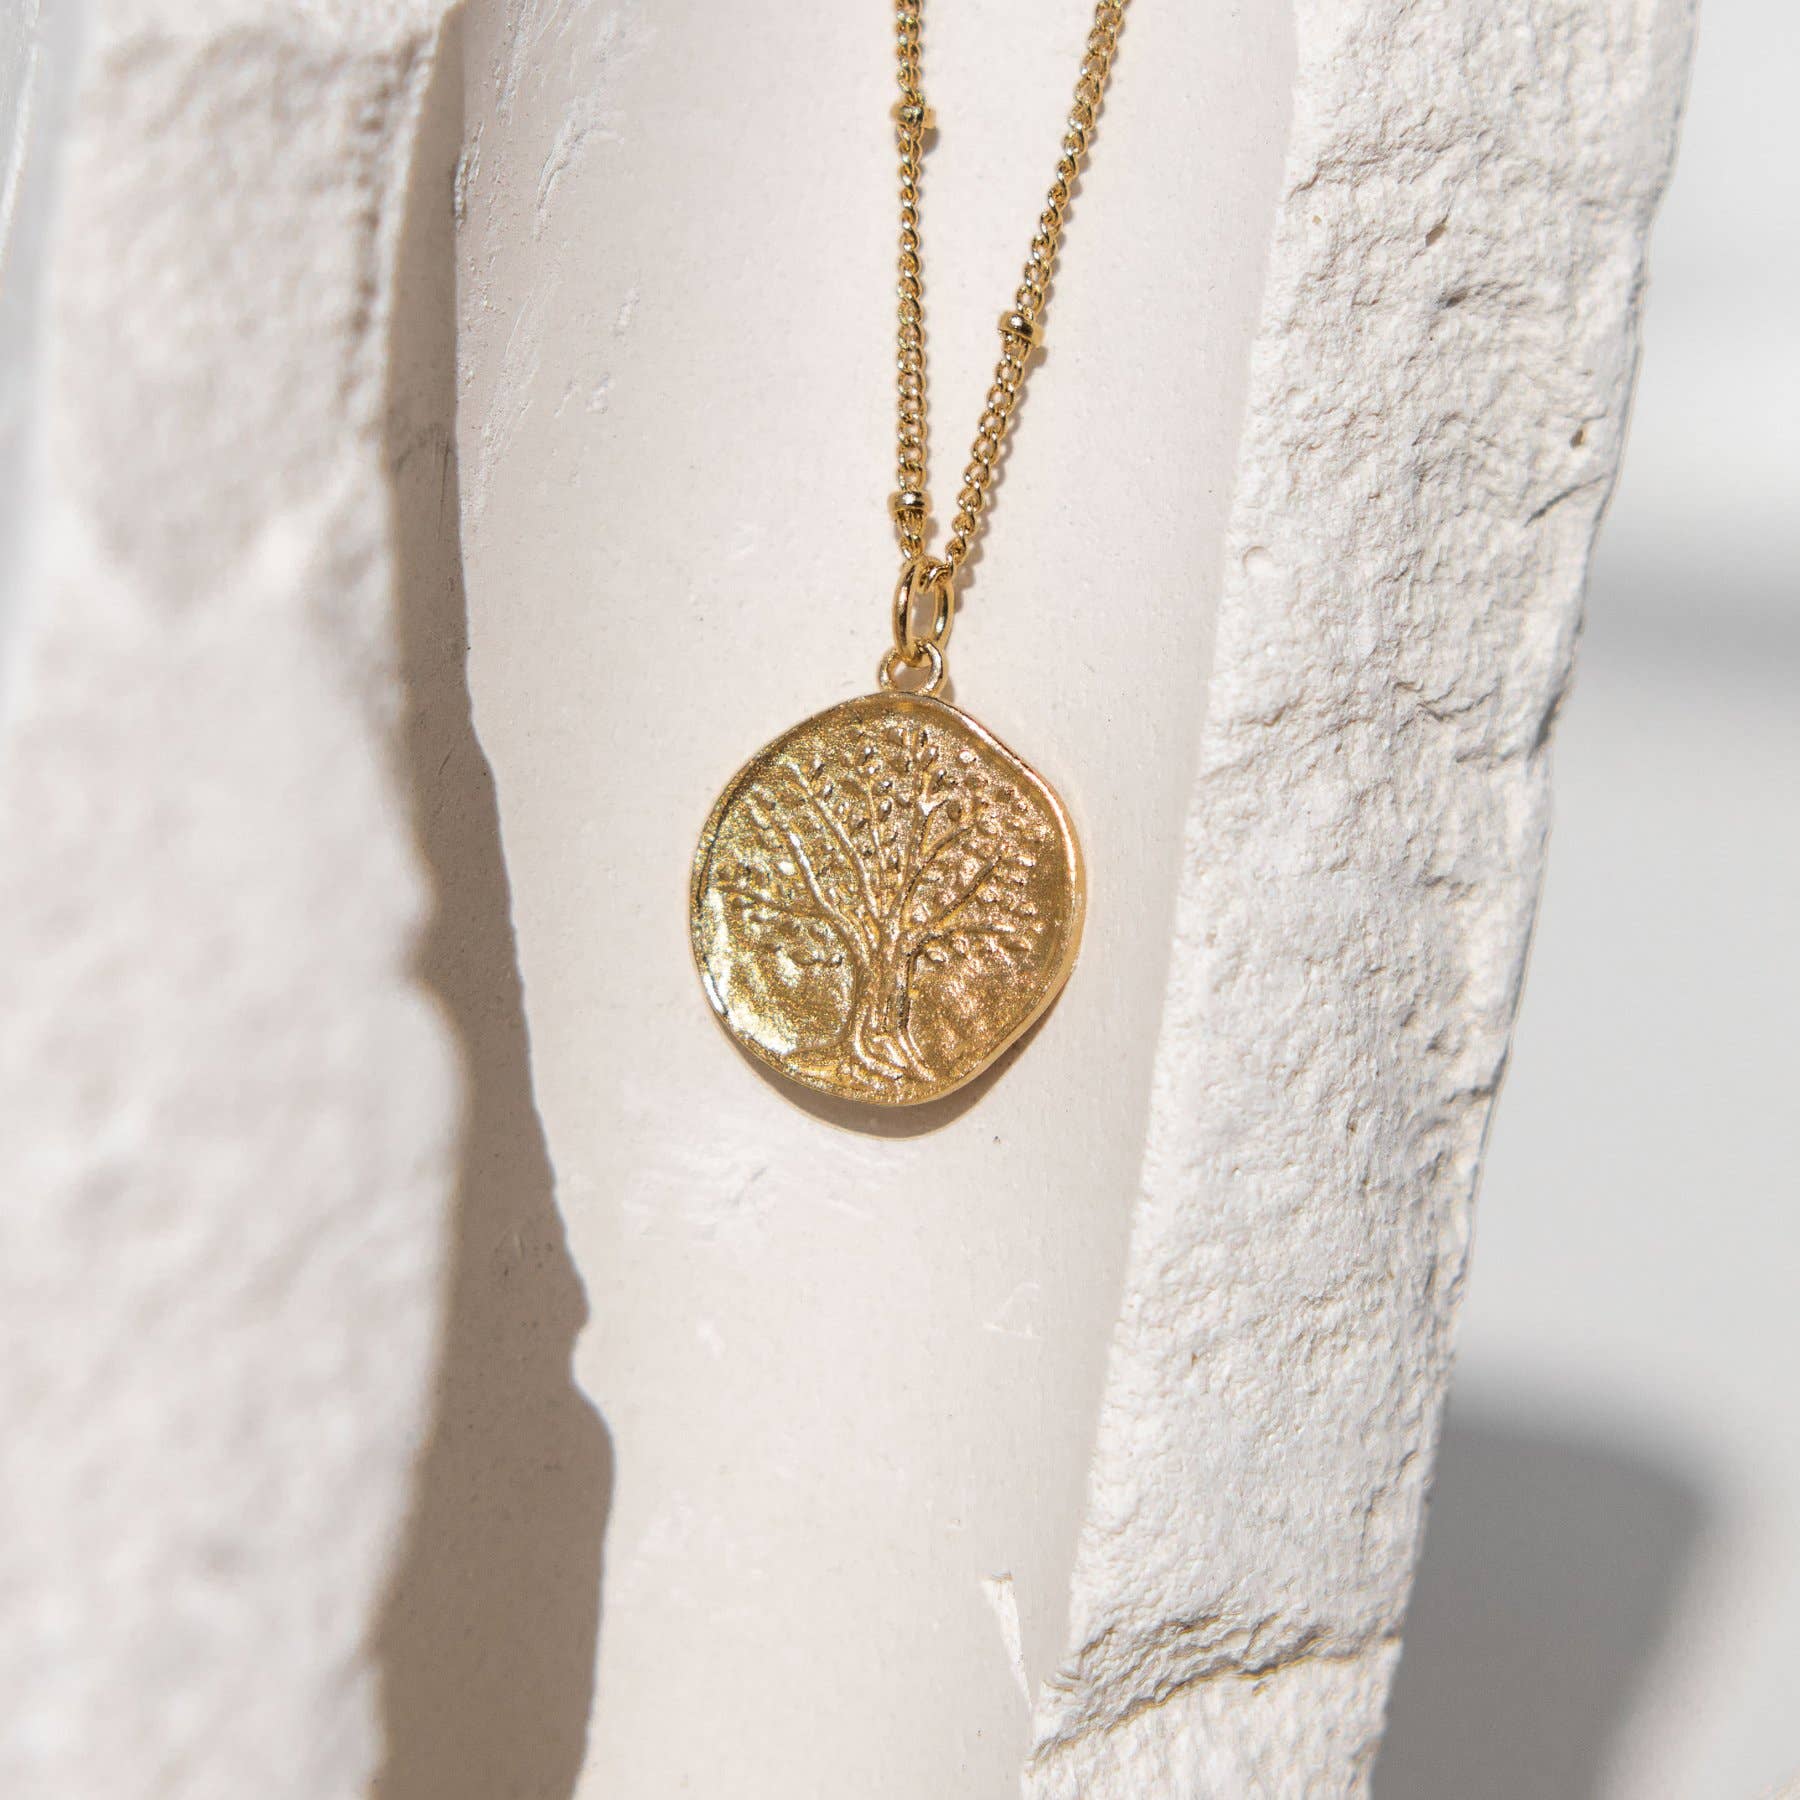 Gaya Necklace | Jewelry Gold Gift Waterproof - Out of the Blue